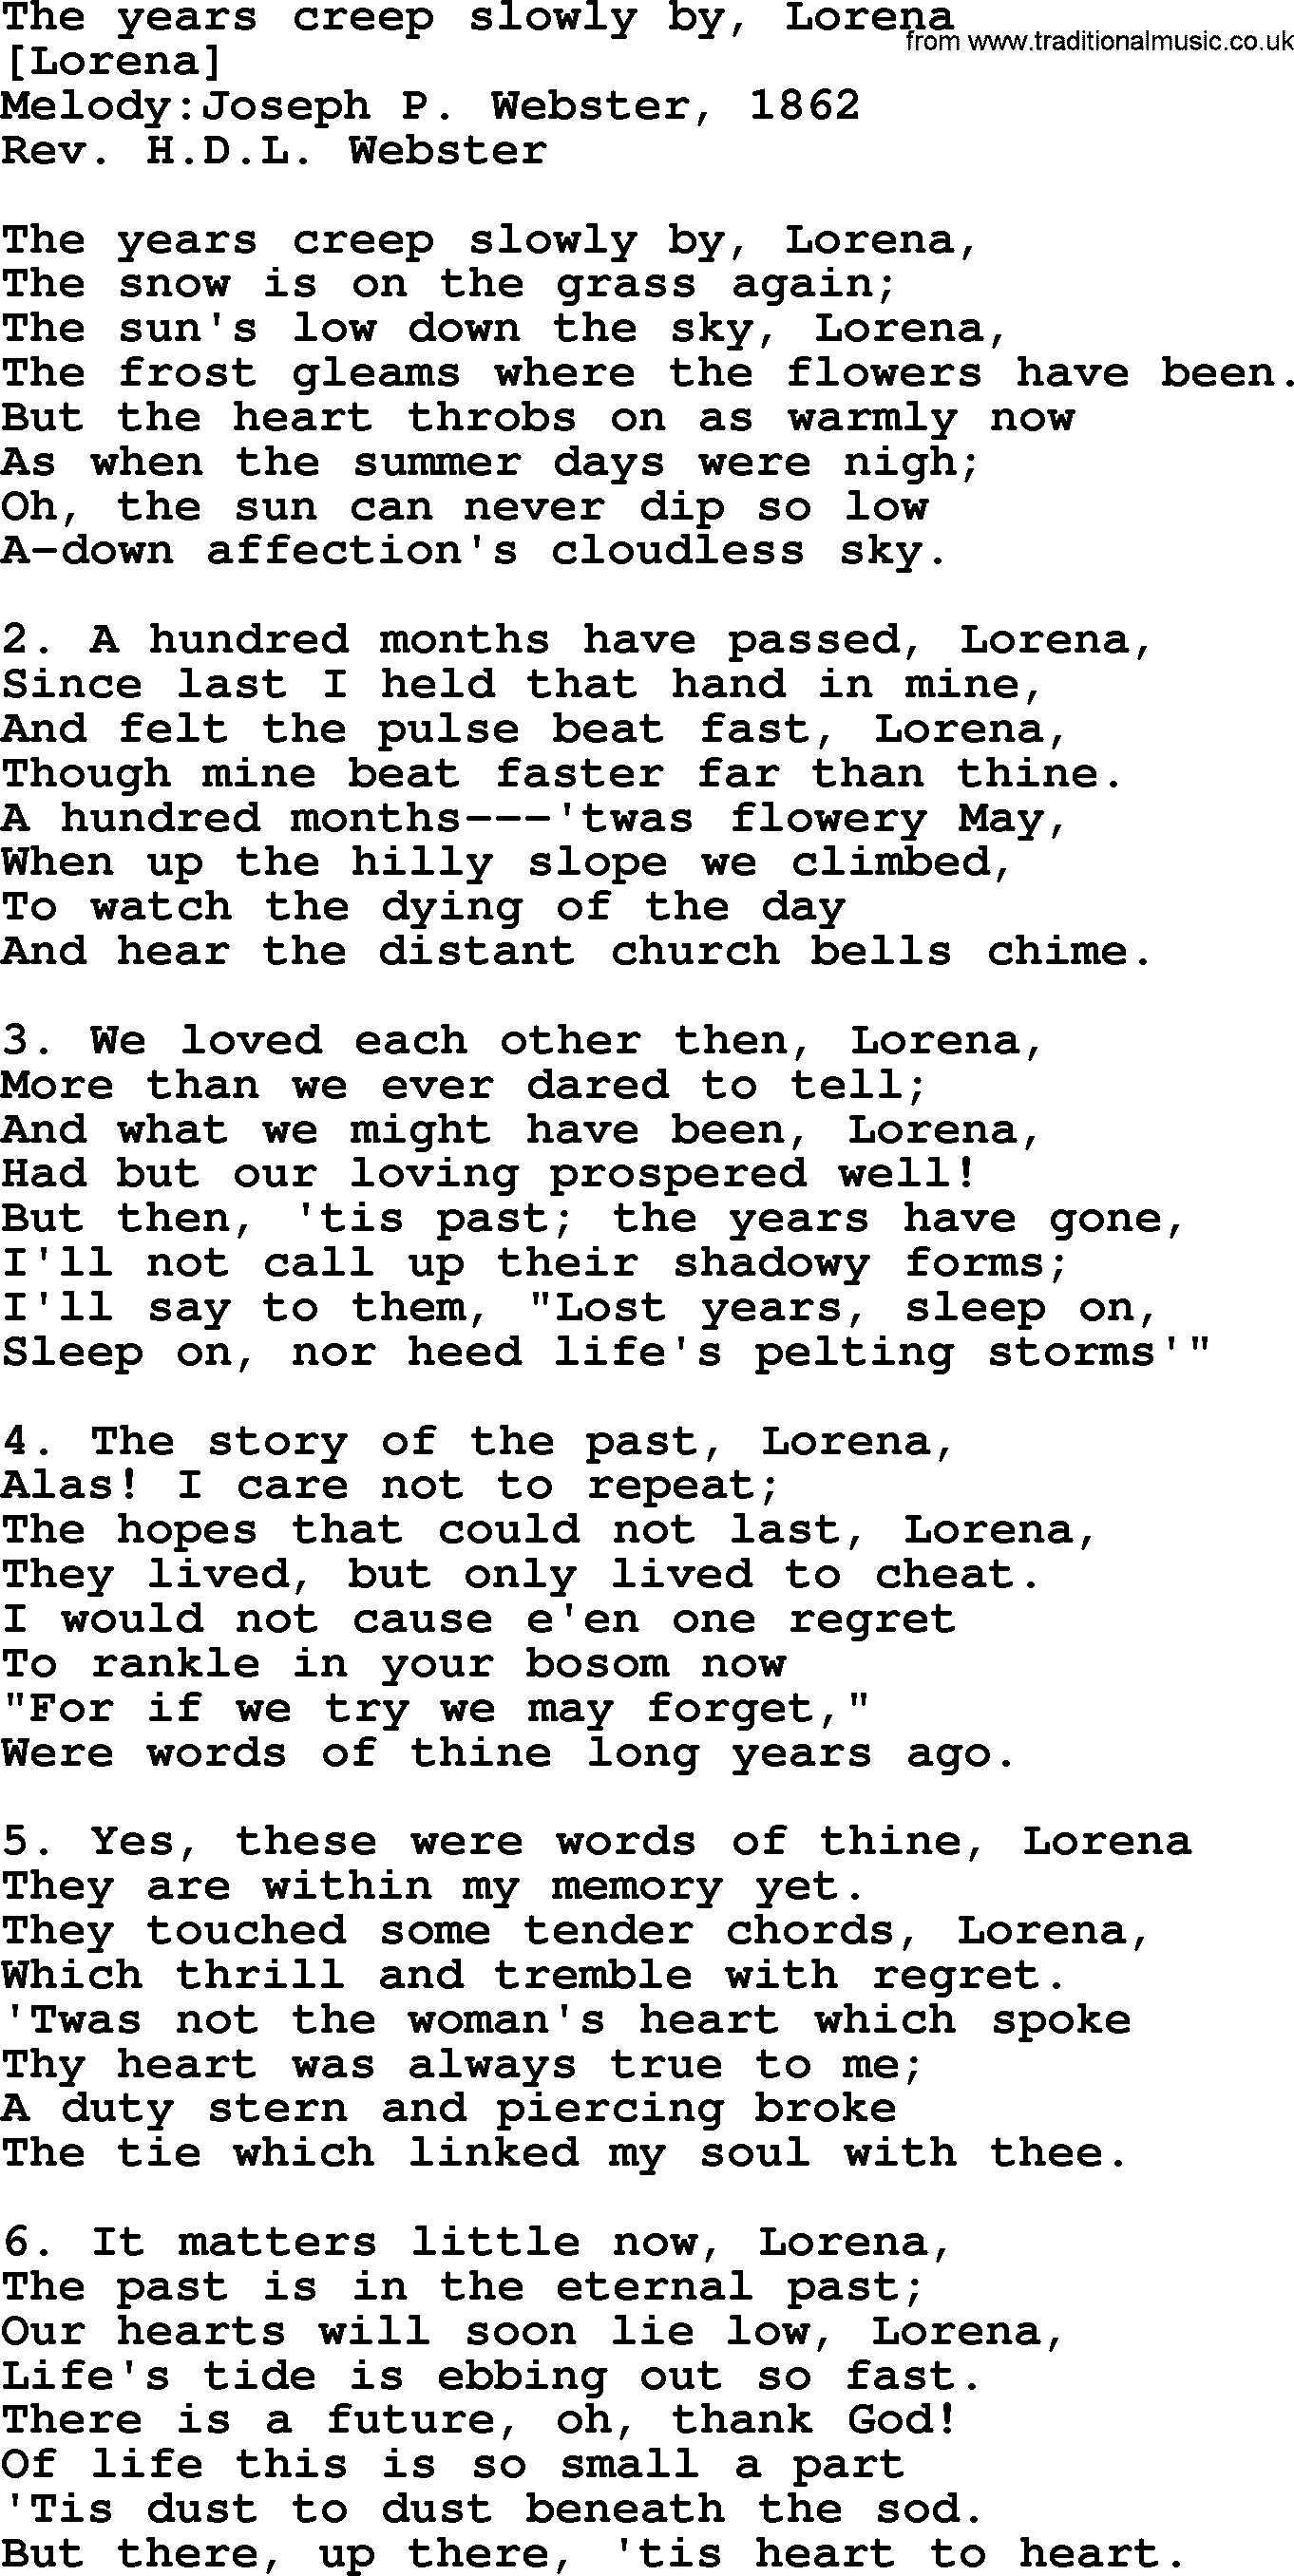 Old American Song: The Years Creep Slowly By, Lorena, lyrics